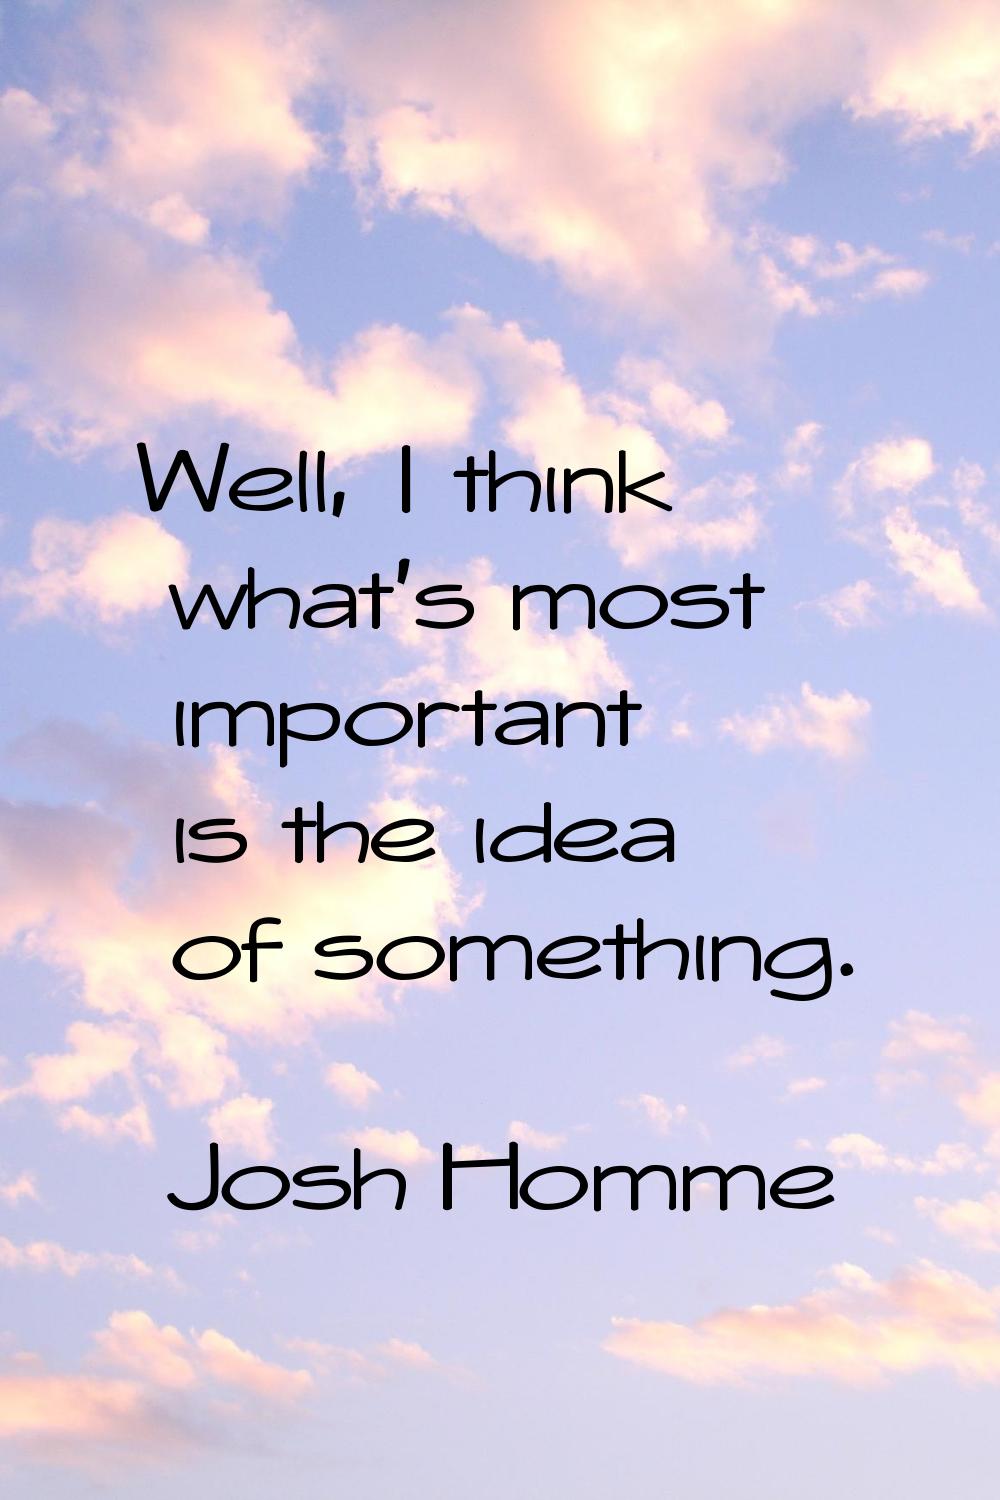 Well, I think what's most important is the idea of something.